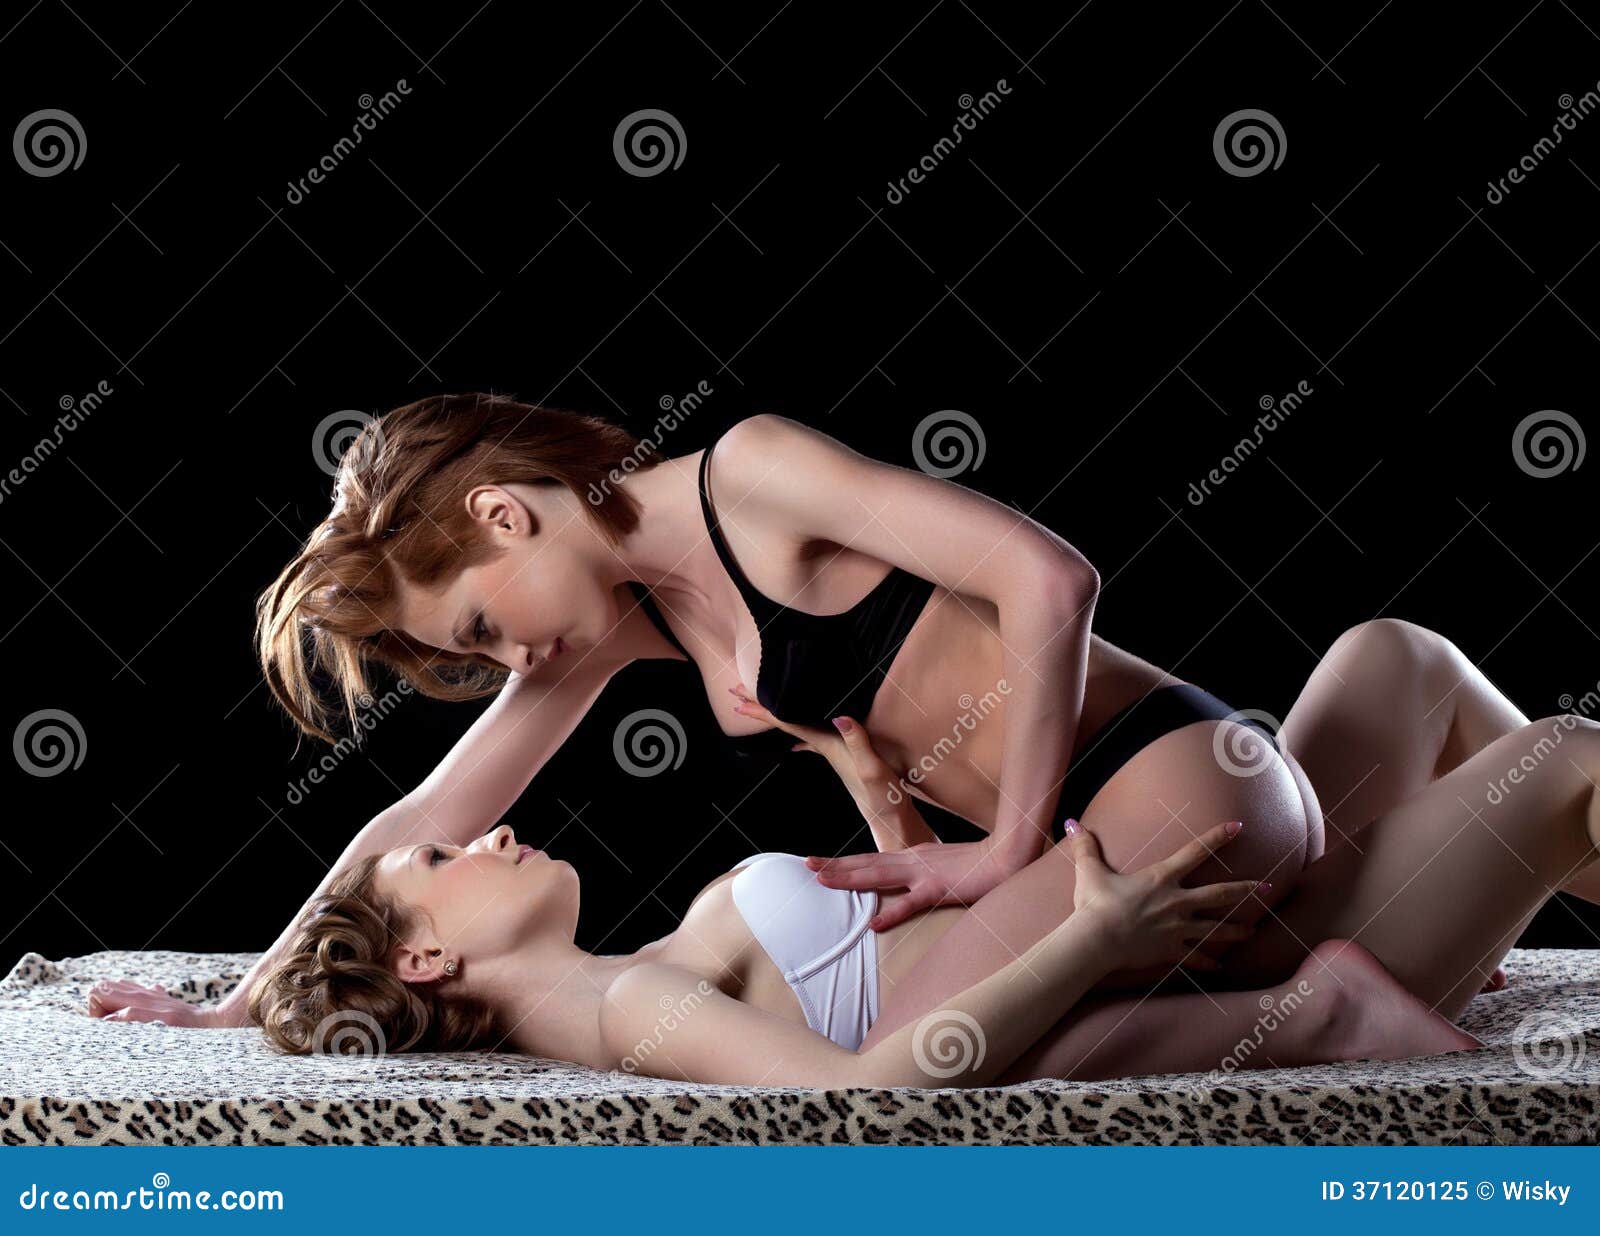 Couple of Pretty Bisexual Girls Lying in Bed Stock Image